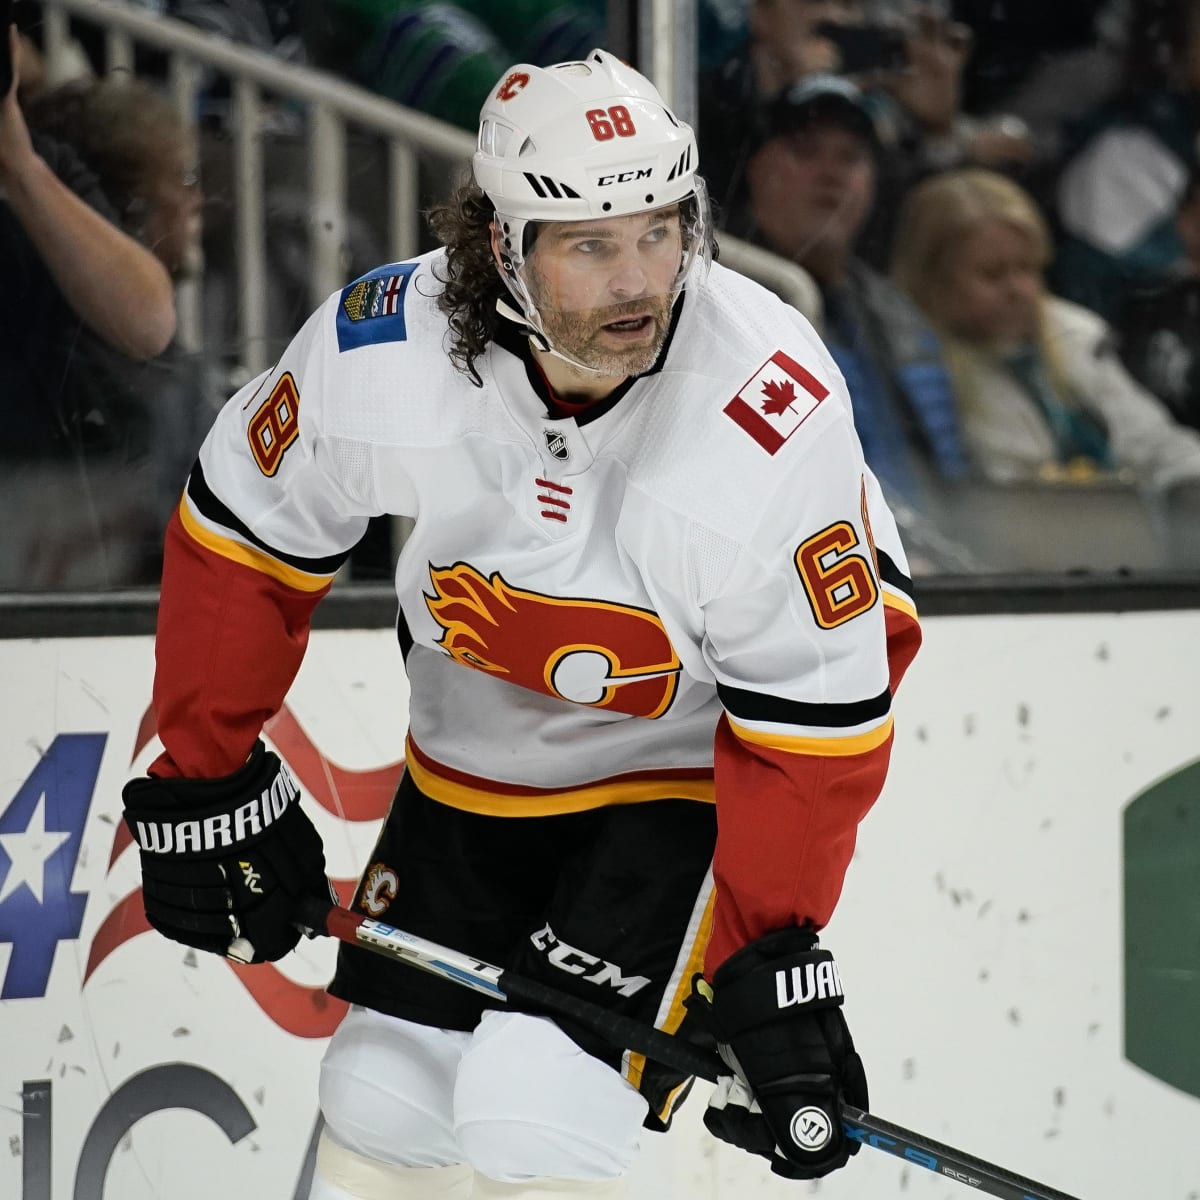 Jaromir Jagr scores his first goal with the Calgary Flames